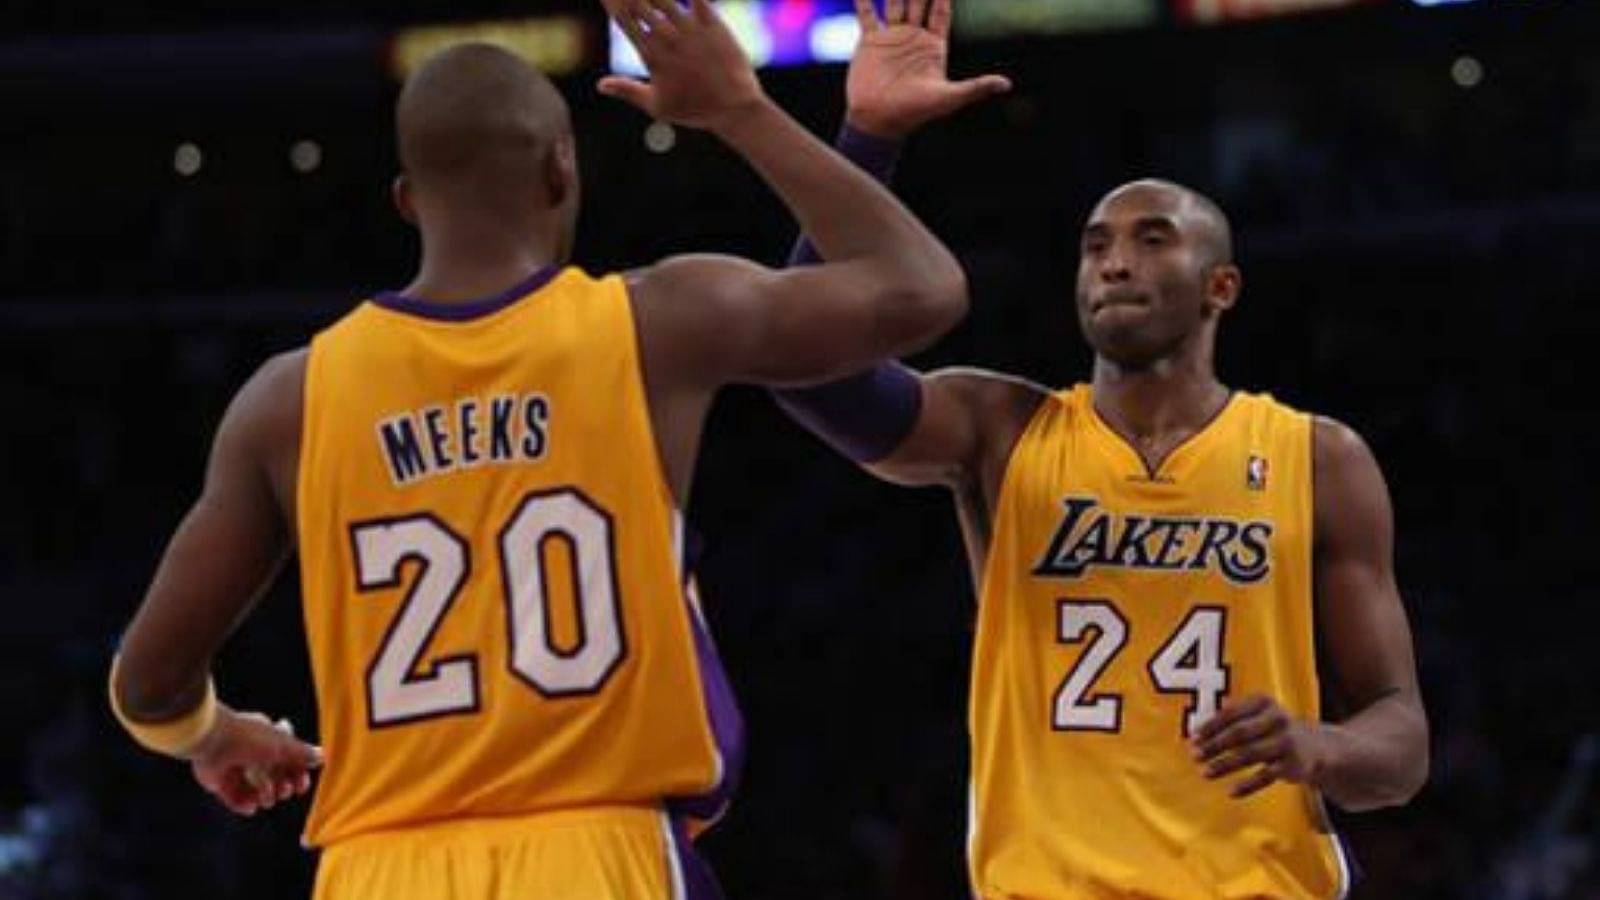 "Jodie Meeks, I was watching you the whole time!": When Kobe Bryant paid respect to one of his teammates by scaring the living daylights out of him